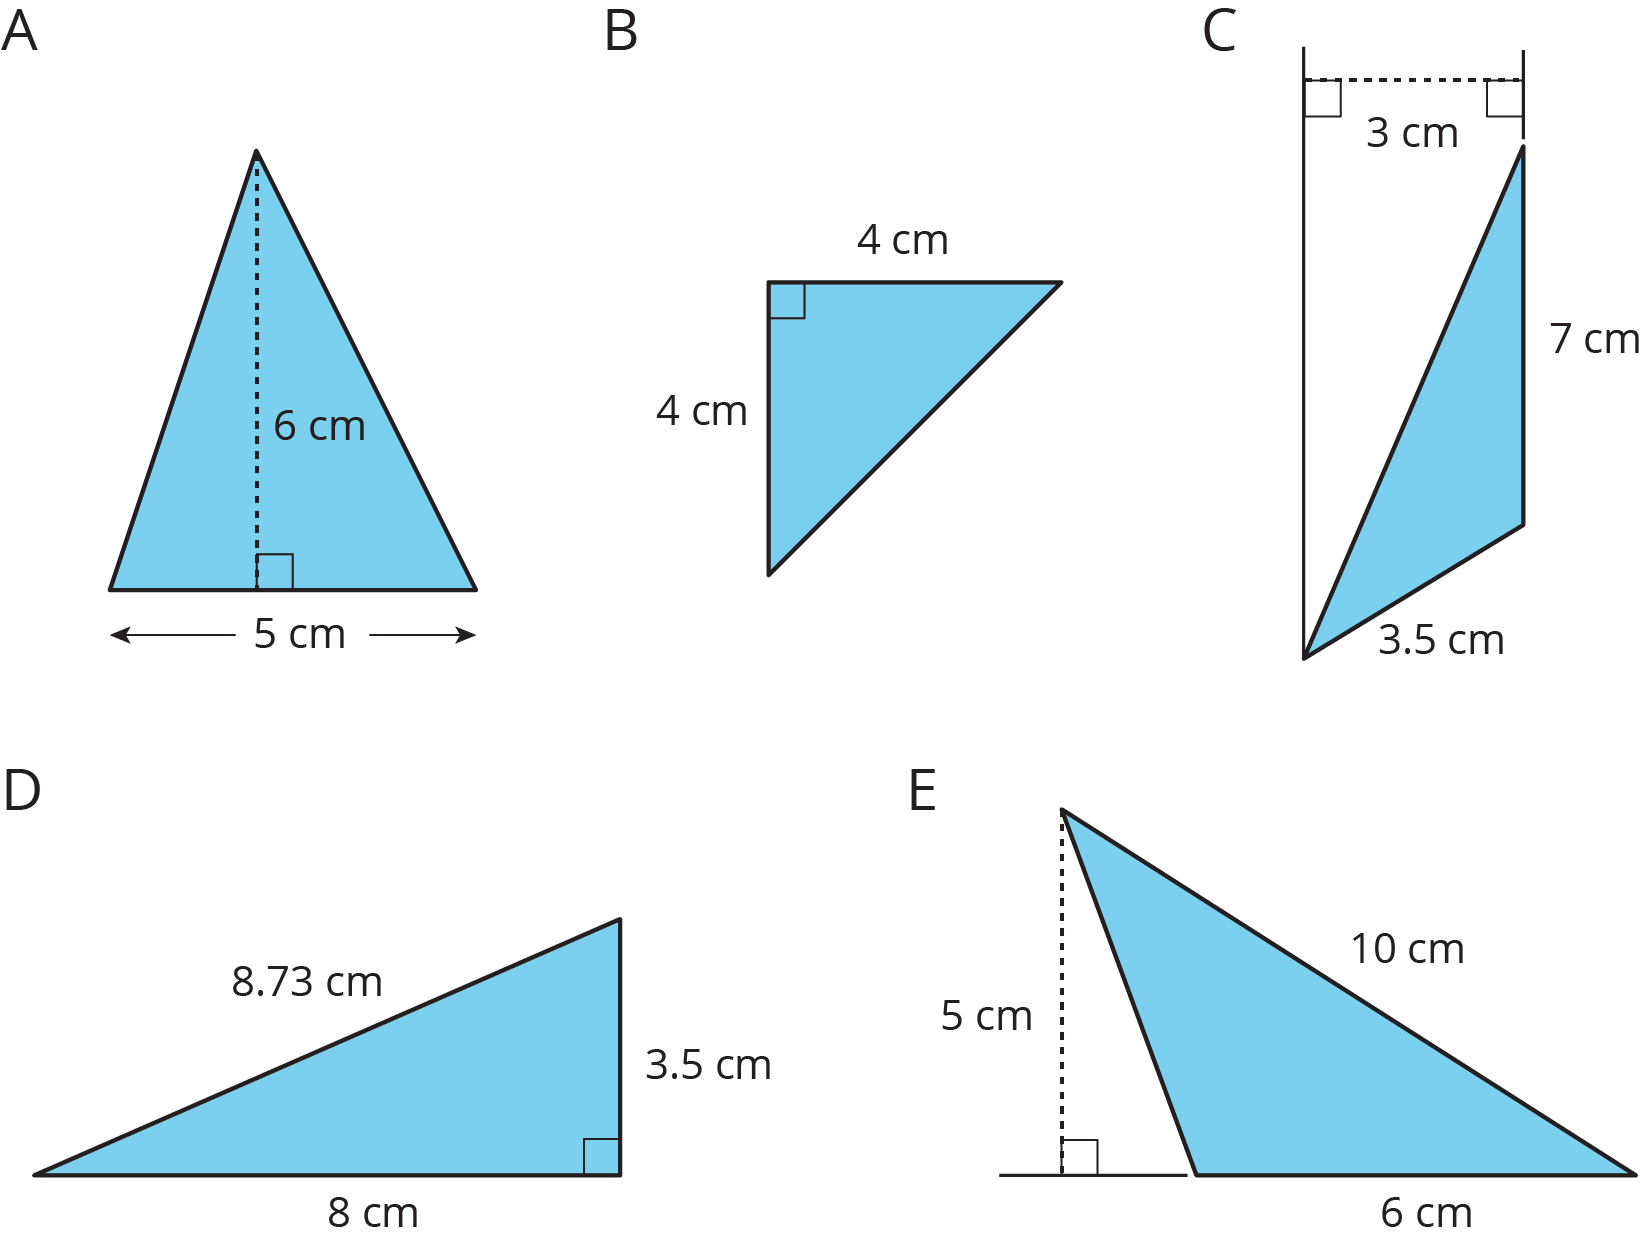 Five triangles, all measurements in centimeters: Triangle A has one side length of 5 with a perpendicular length of 6 from that side to the opposite vertex. Triangle B has sides of length 4, 4, and unknown with a 90-degree angle between the two known sides. Triangle C has side lengths 7, 3.5, and unknown. The perpendicular length from the side of length 7 to the opposite vertex is 3. Triangle D has side lengths 8, 3.5, and 8.73. There is a 90-degree angle between the sides of length 8 and 3.5. Triangle E has sides 10, 6, and unknown. The perpendicular length from the side of length 6 to the opposite vertex is 5